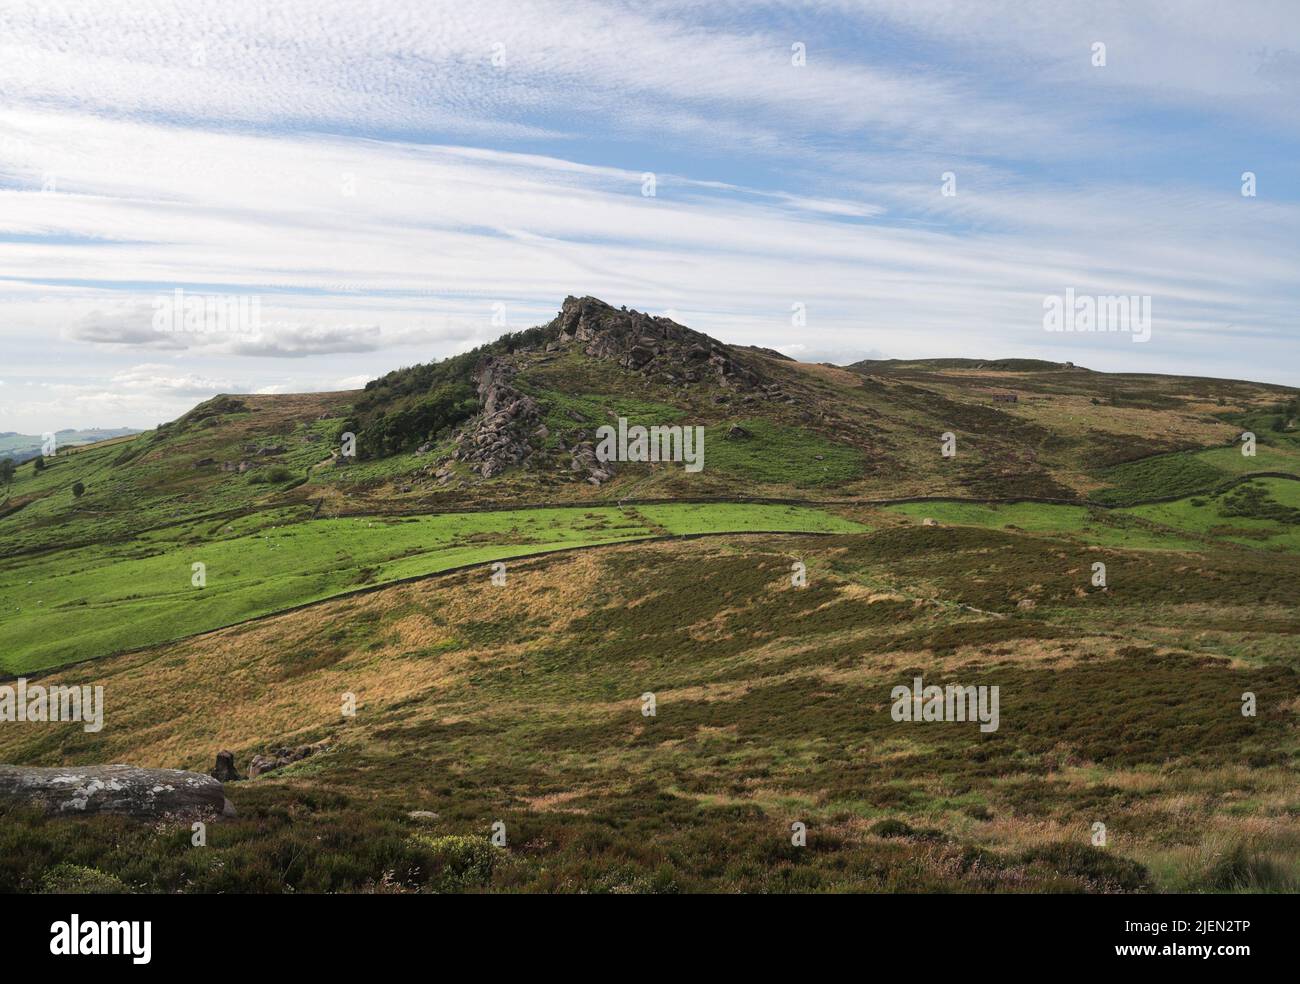 The Roaches in Staffordshire, Peak District England UK. National park landscape Stock Photo